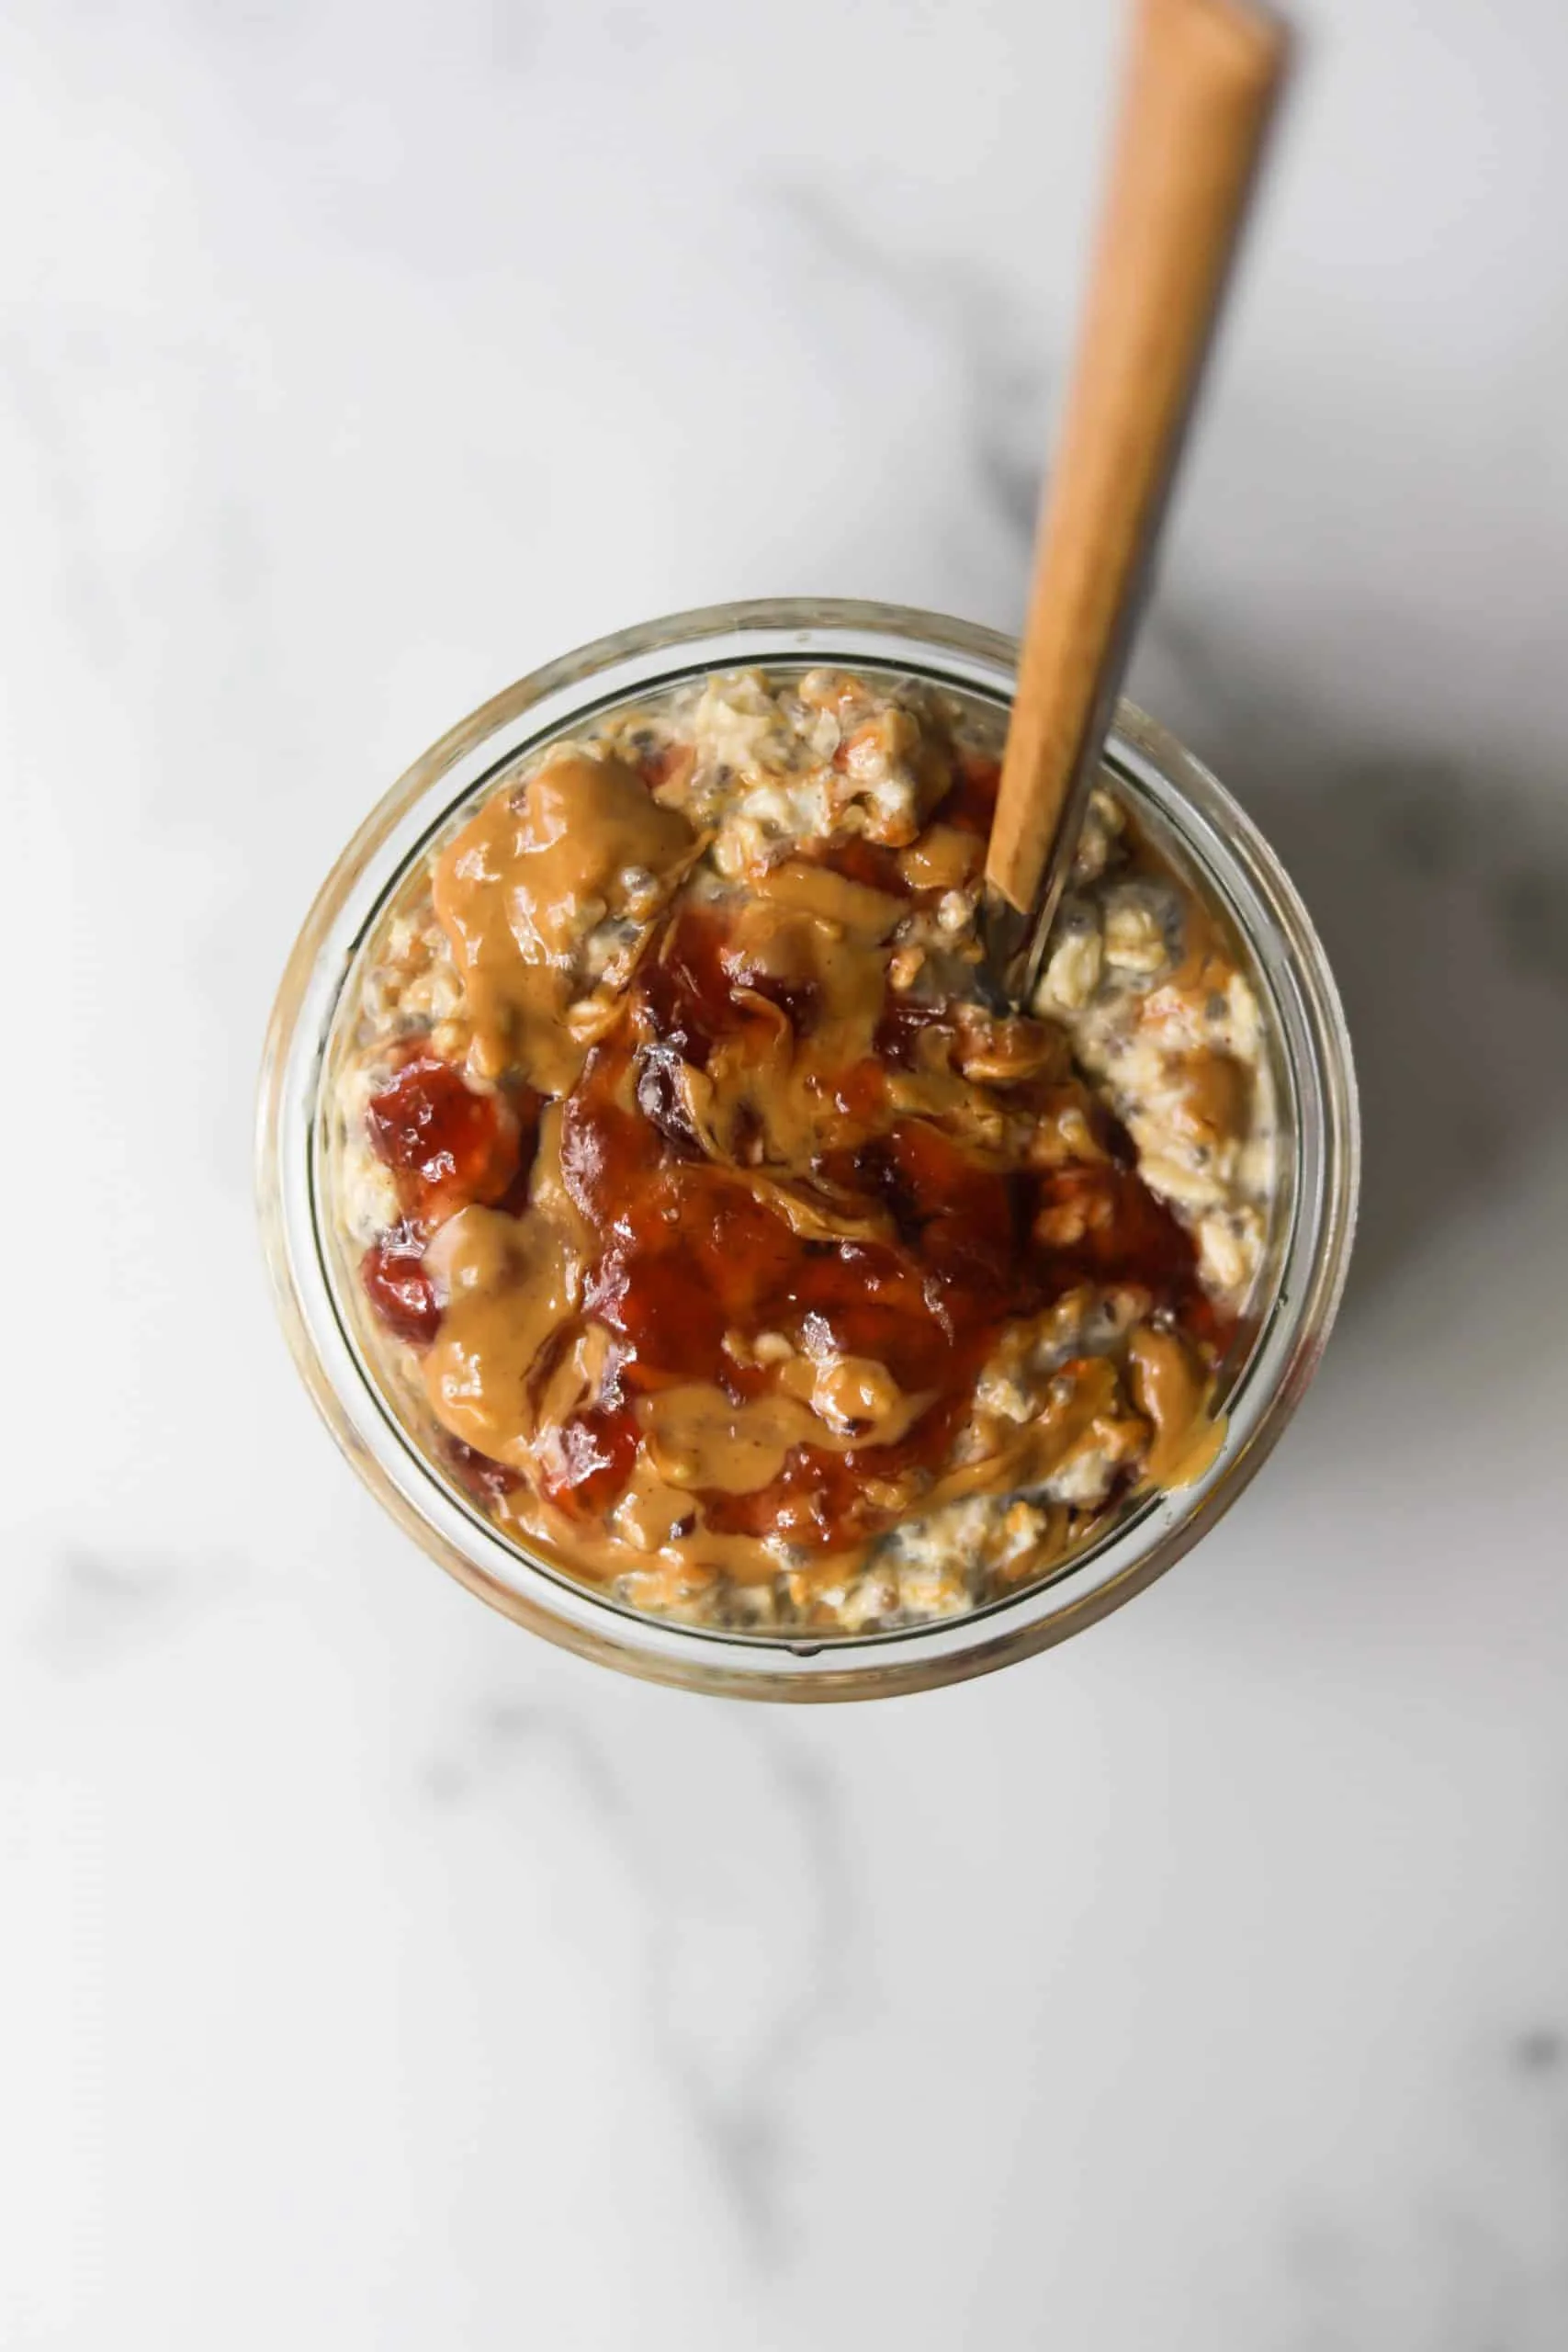 Overnight Oats topped with peanut butter and jelly.